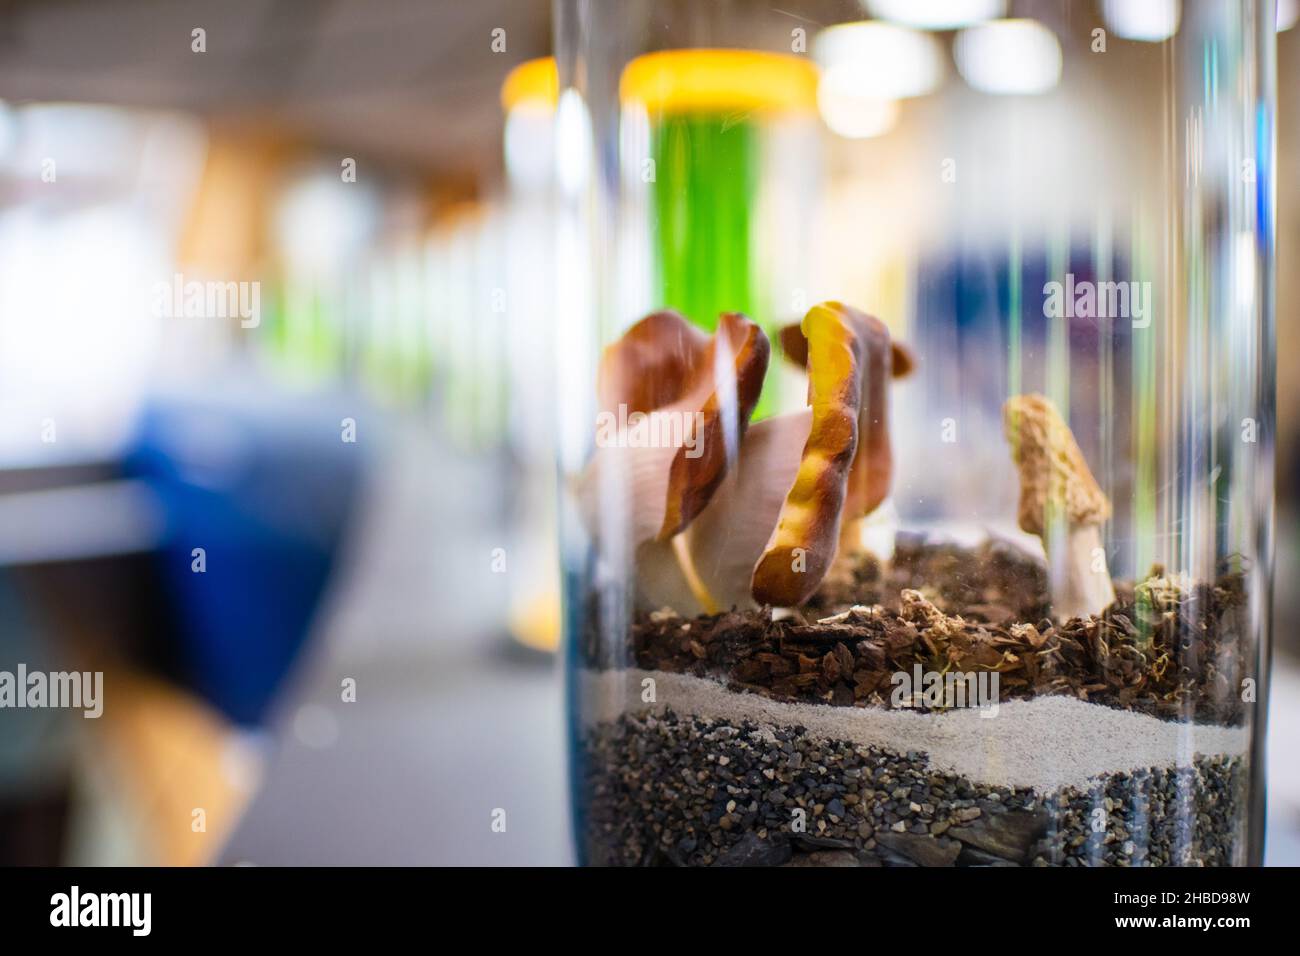 New species of mushrooms from laboratory Stock Photo